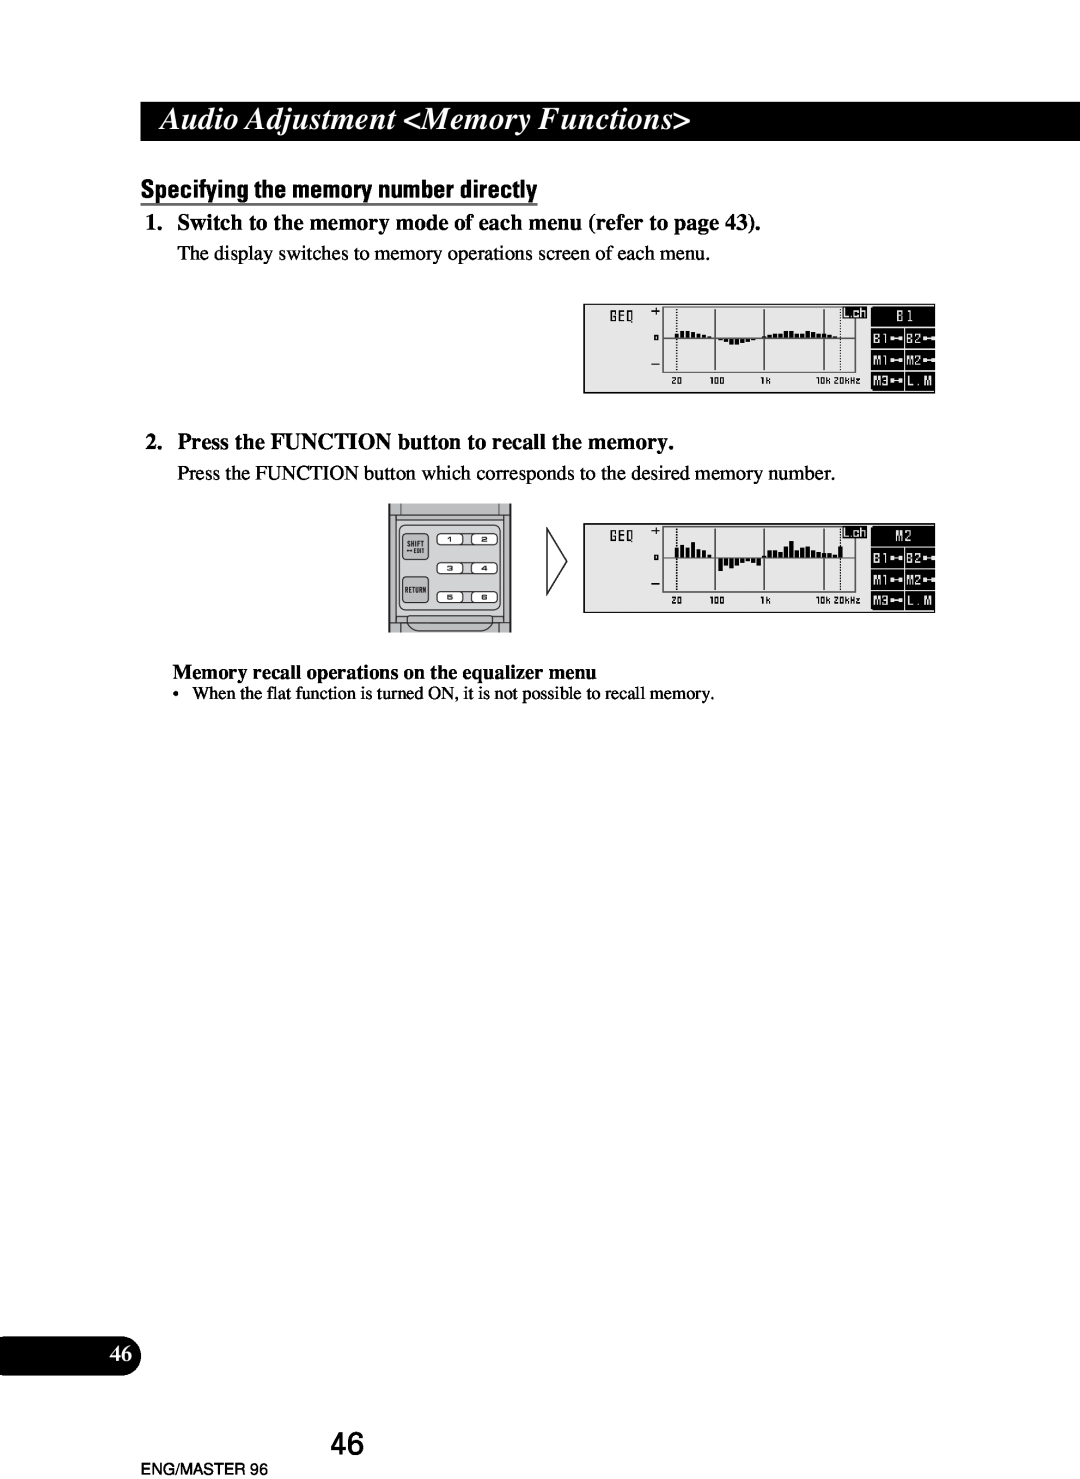 Pioneer RS-P90, RS-D7R Specifying the memory number directly, Switch to the memory mode of each menu refer to page 